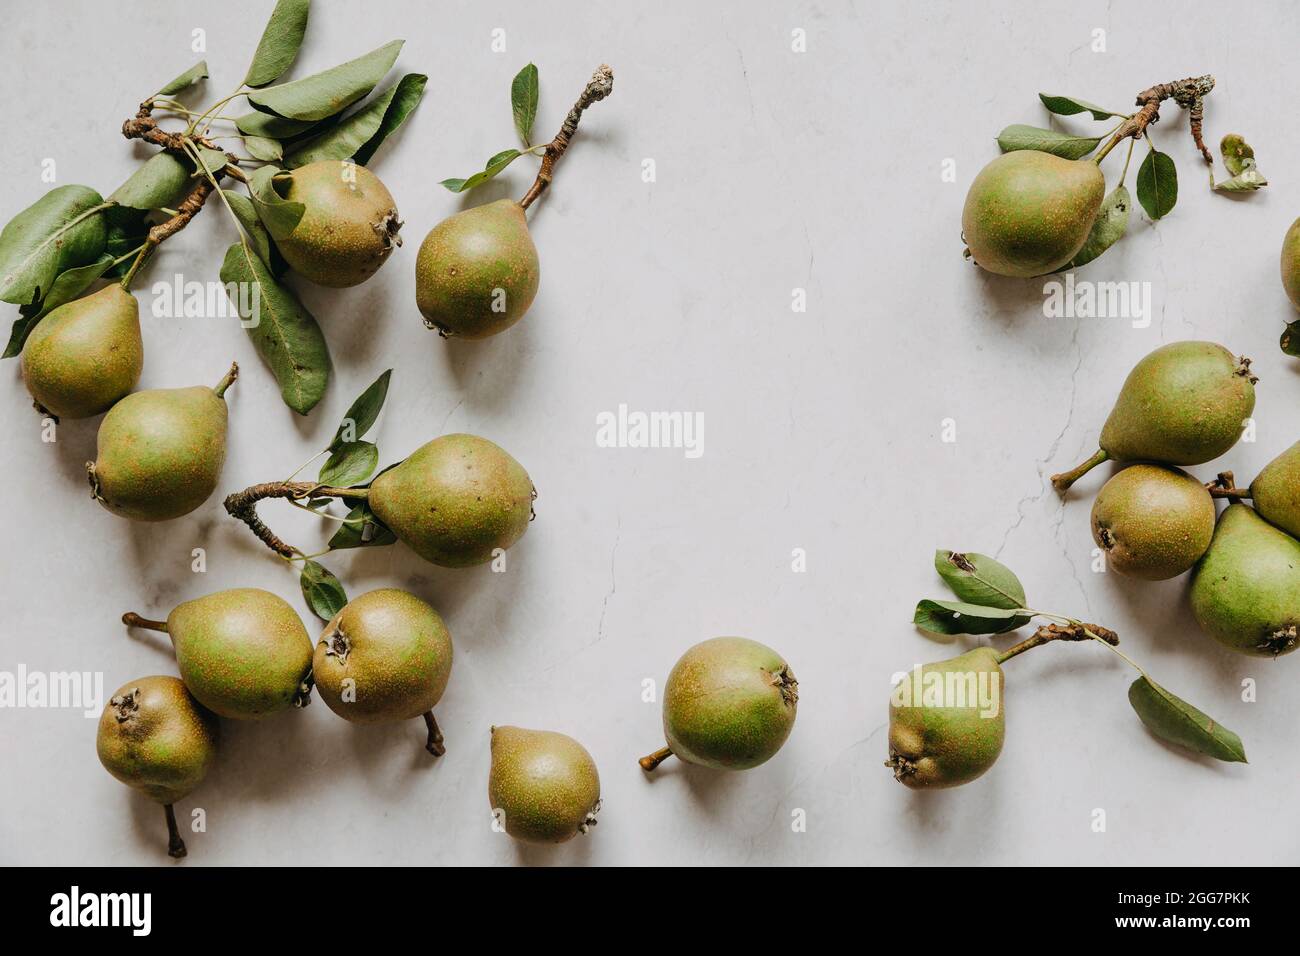 Small pears on a white background Stock Photo